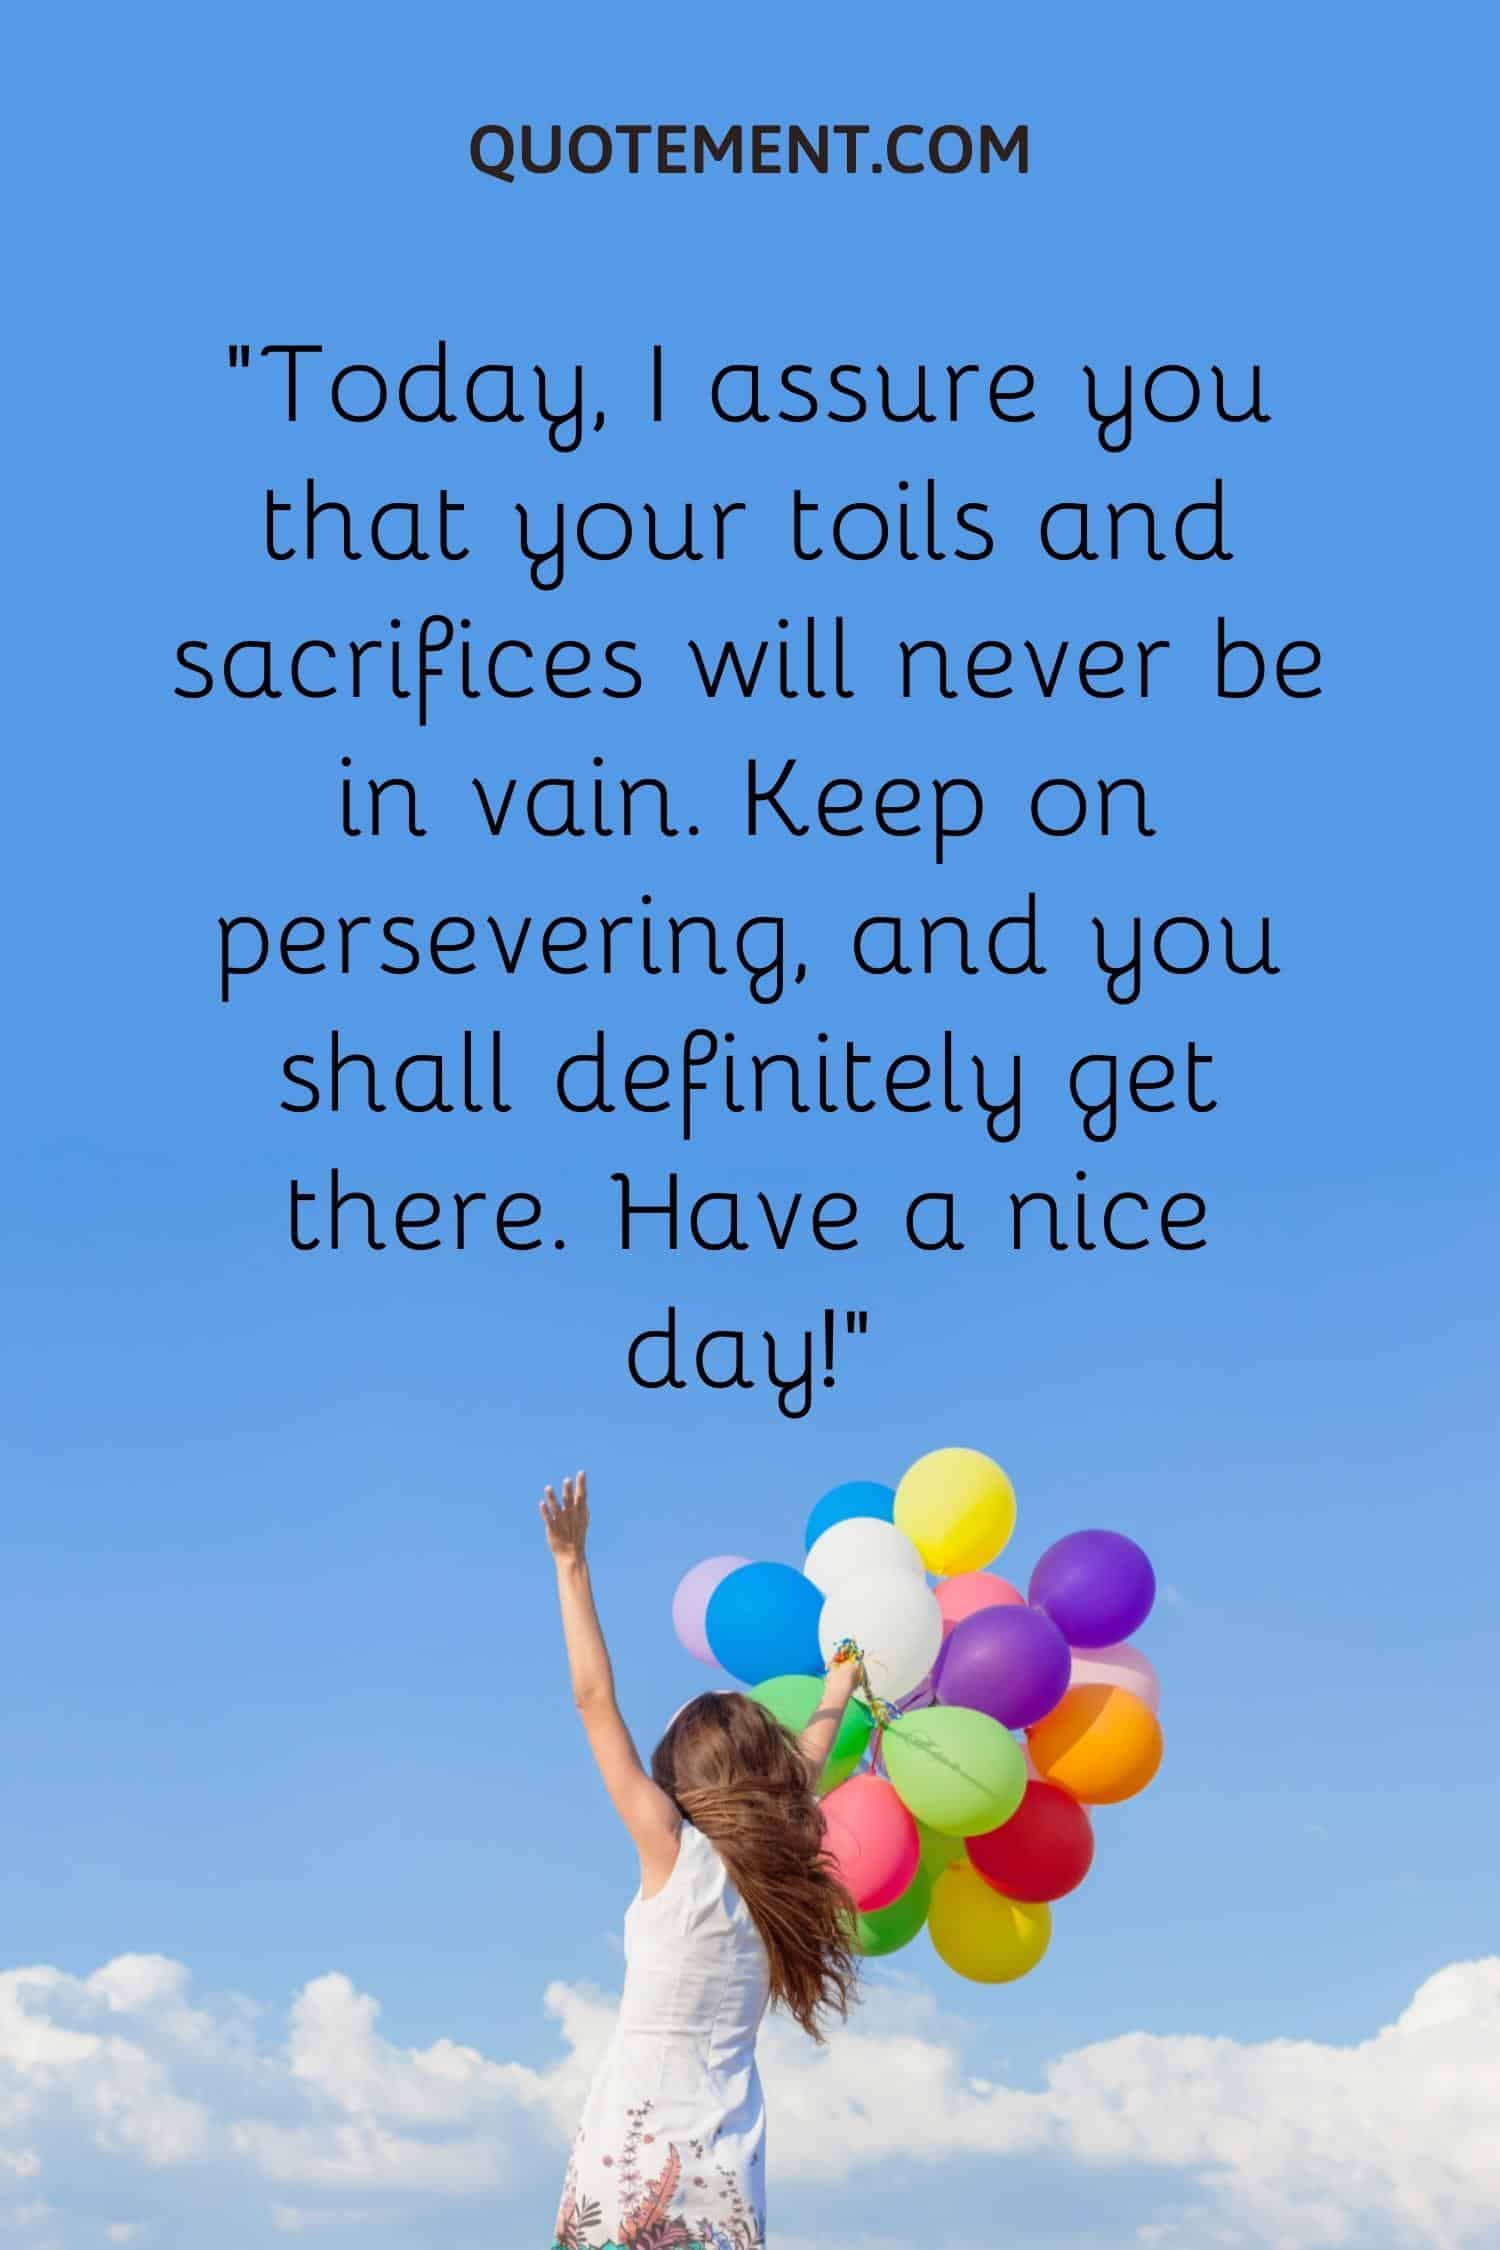 Today, I assure you that your toils and sacrifices will never be in vain